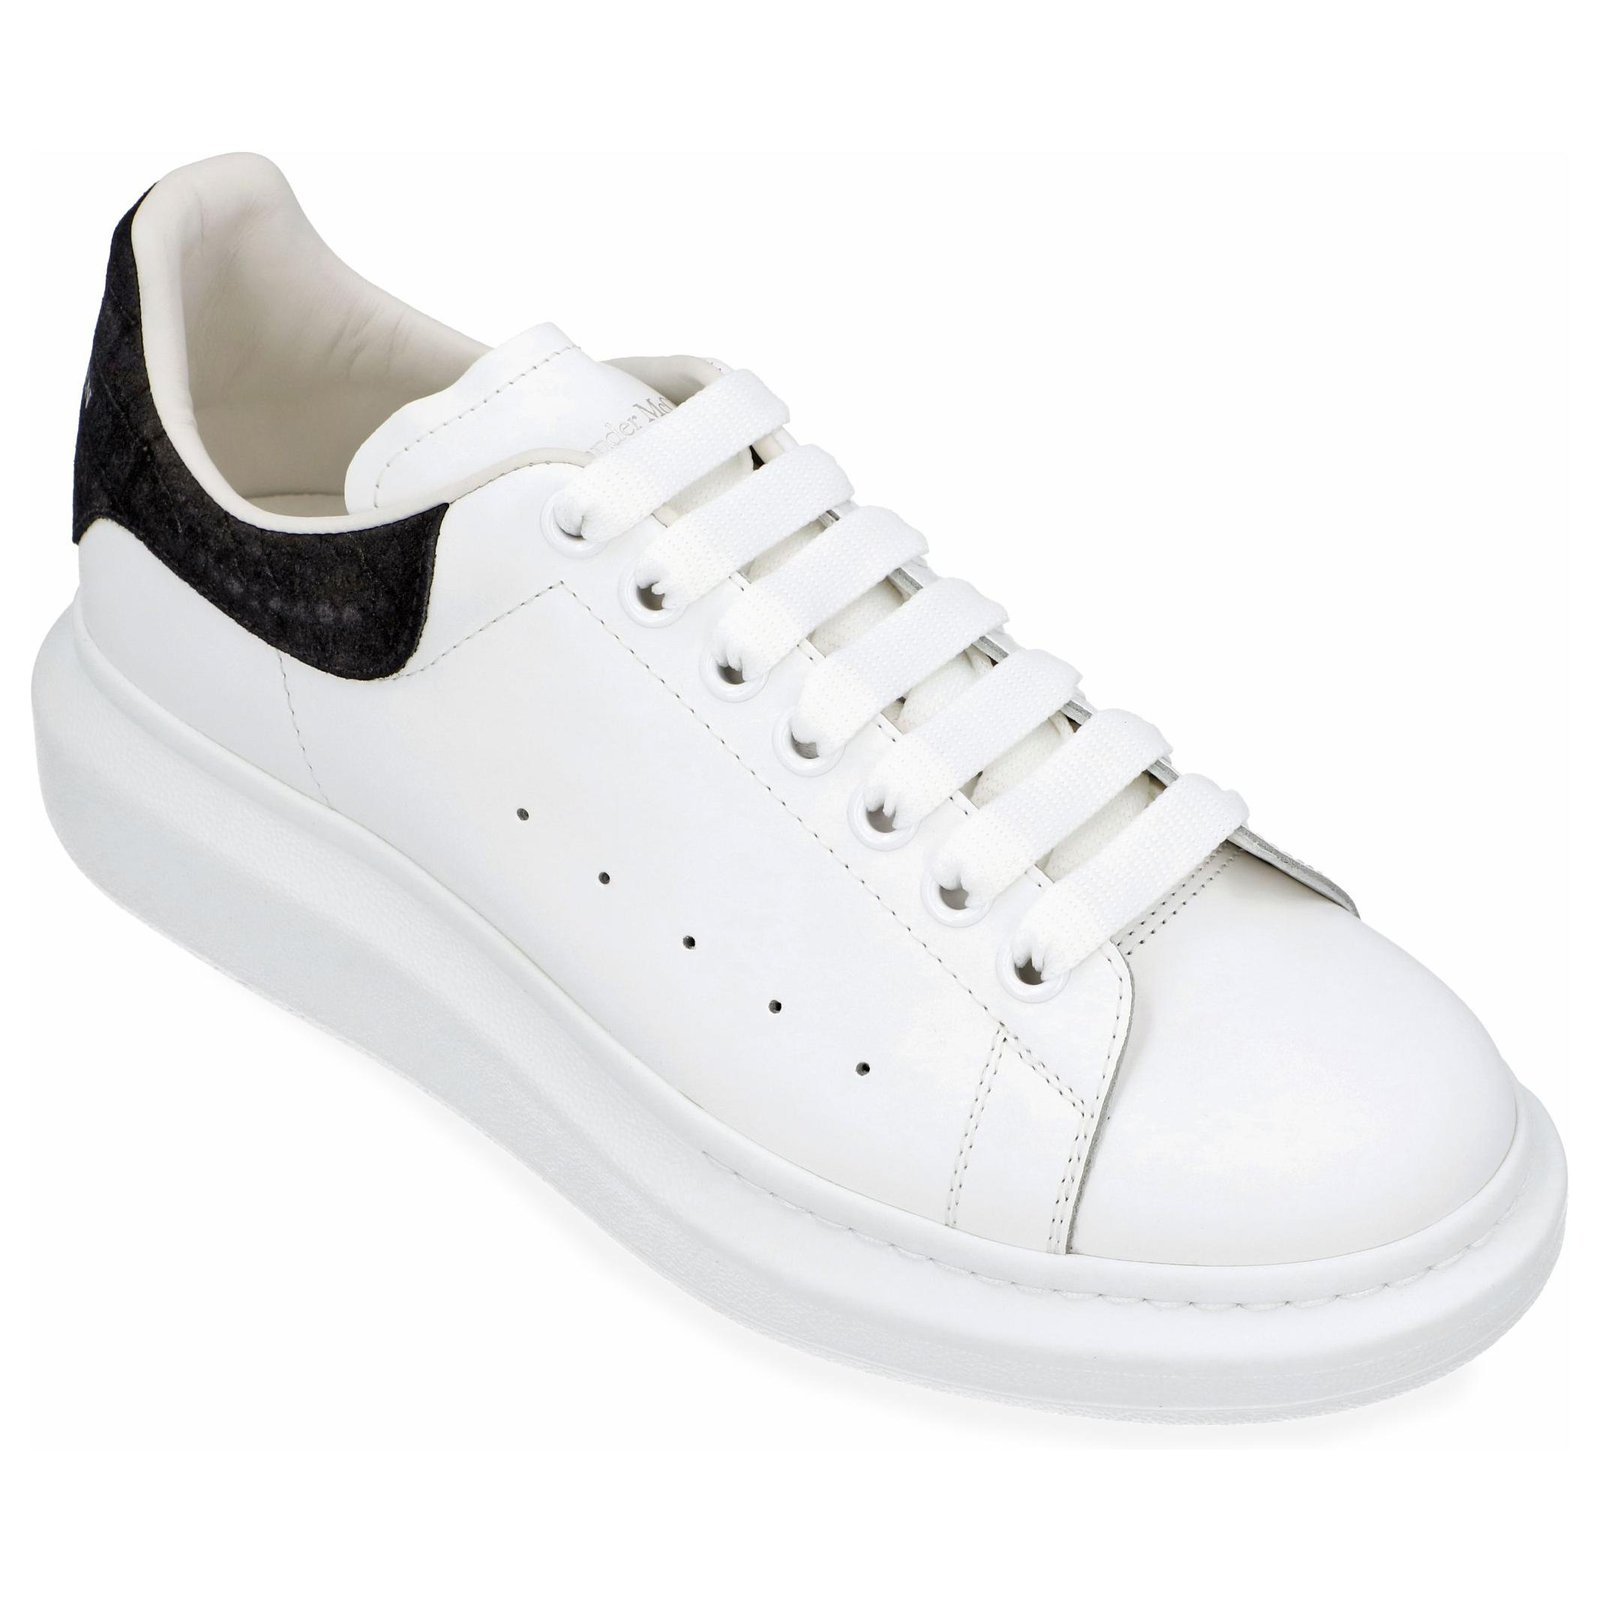 Alexander McQueen Red/White Leather Larry Oversized Low Top